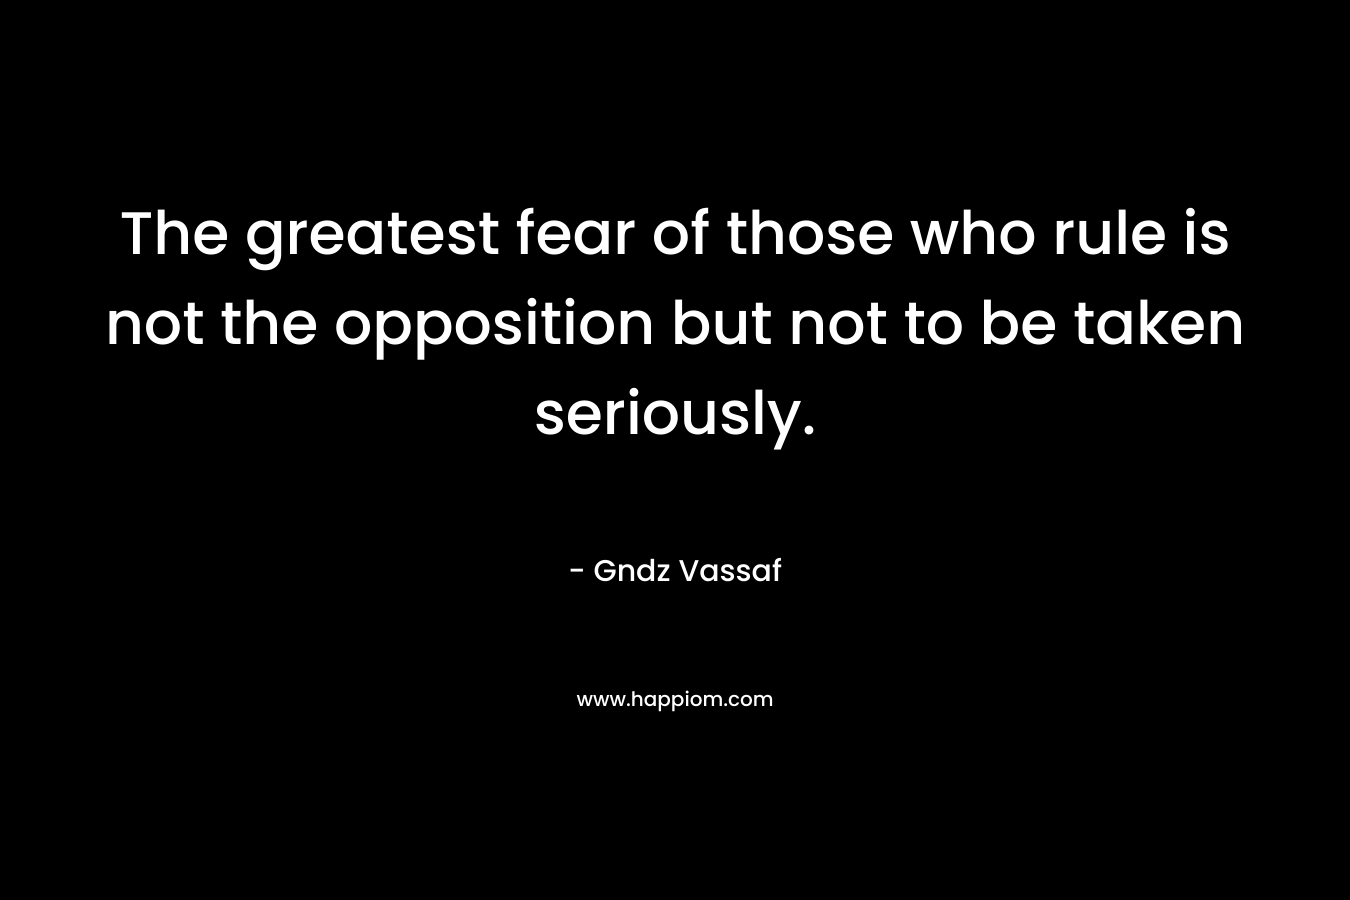 The greatest fear of those who rule is not the opposition but not to be taken seriously.